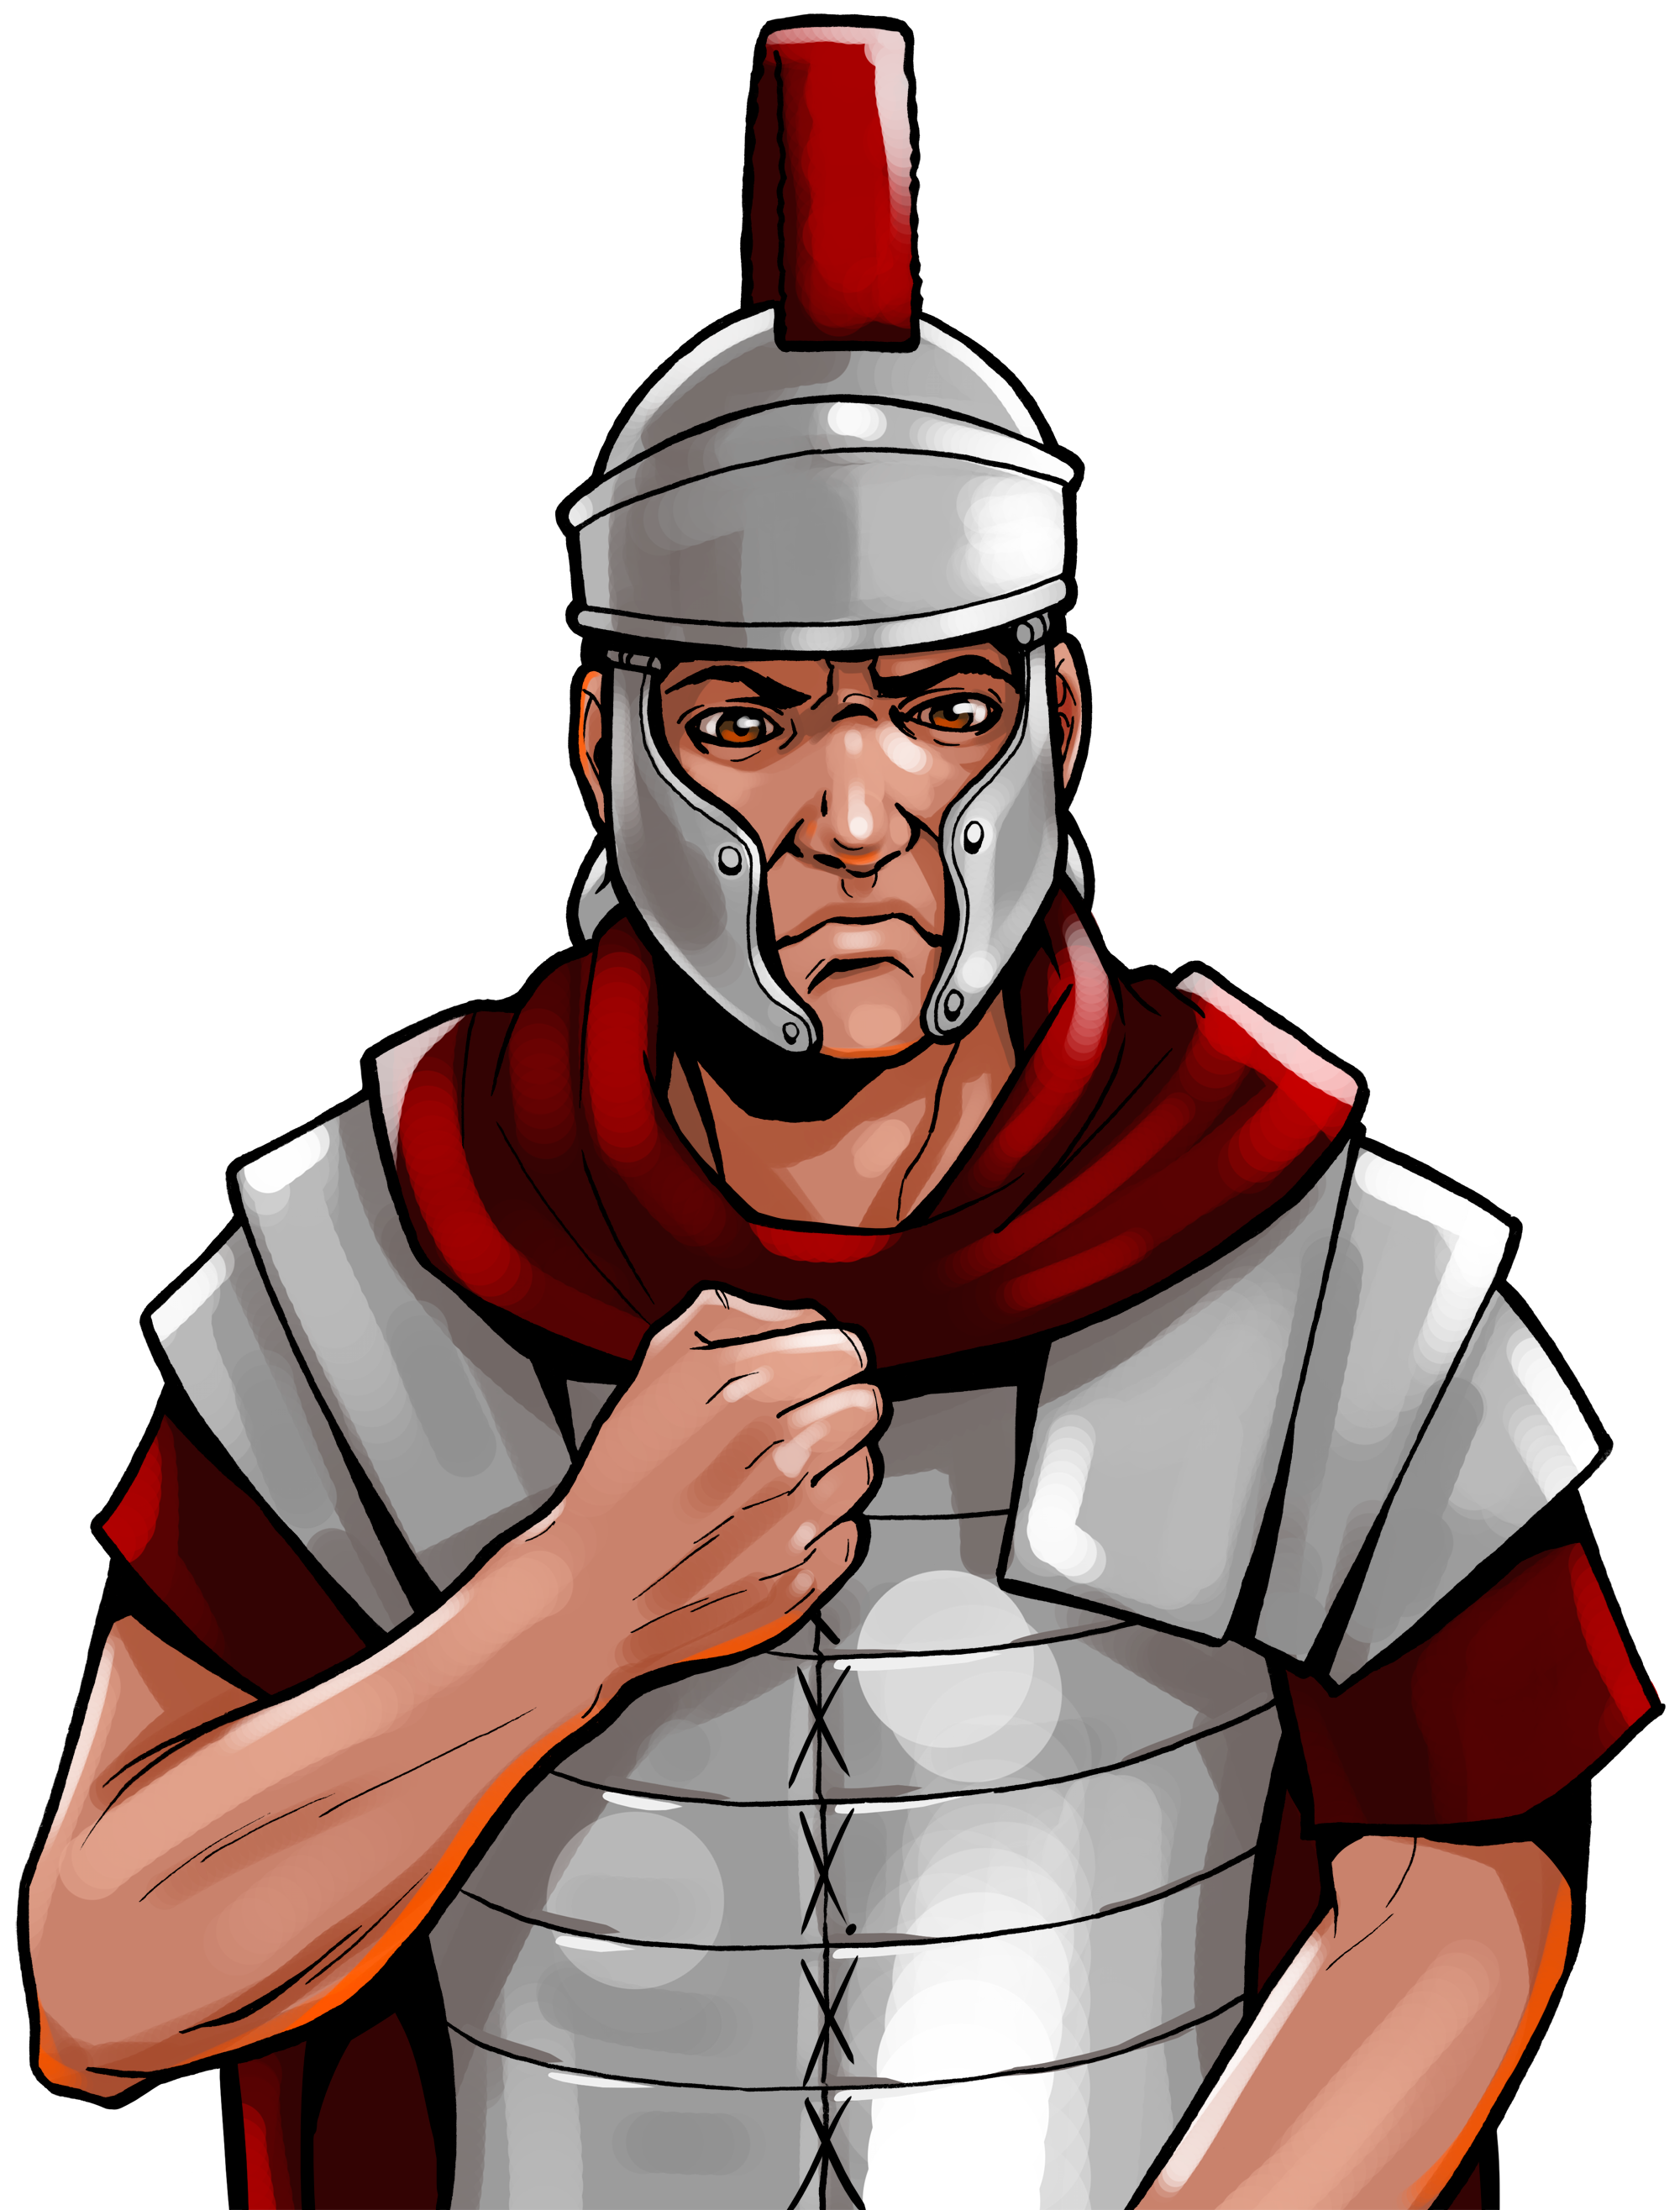 06_character_soldier_maingame_victorious.png thumbnail